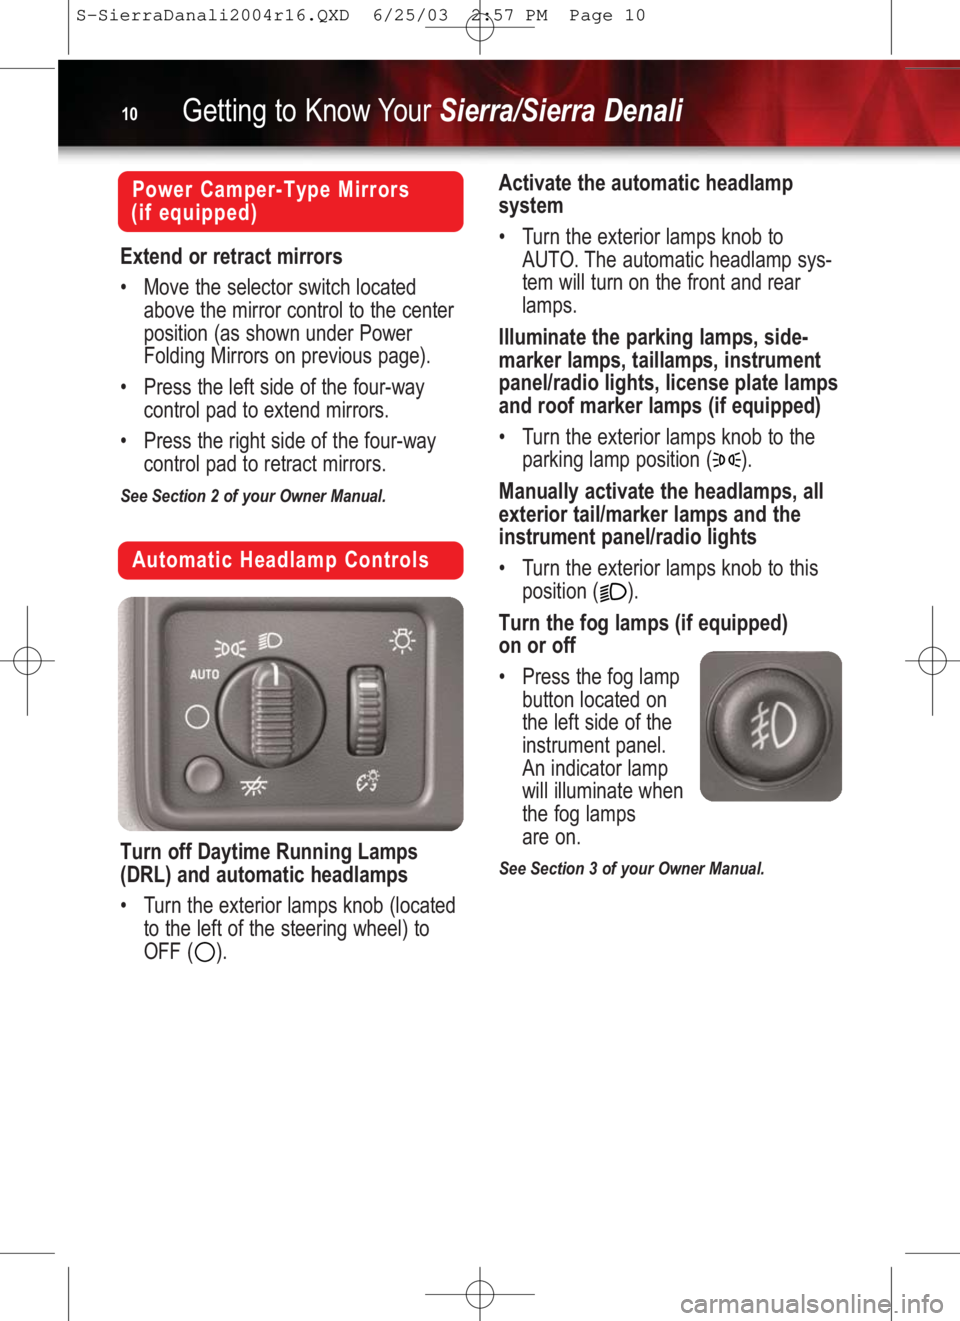 GMC SIERRA 2004  Get To Know Guide Getting to Know YourSierra/Sierra Denali10
Automatic Headlamp Controls
Turn off Daytime Running Lamps
(DRL) and automatic headlamps
•Turn the exterior lamps knob (located
to the left of the steering